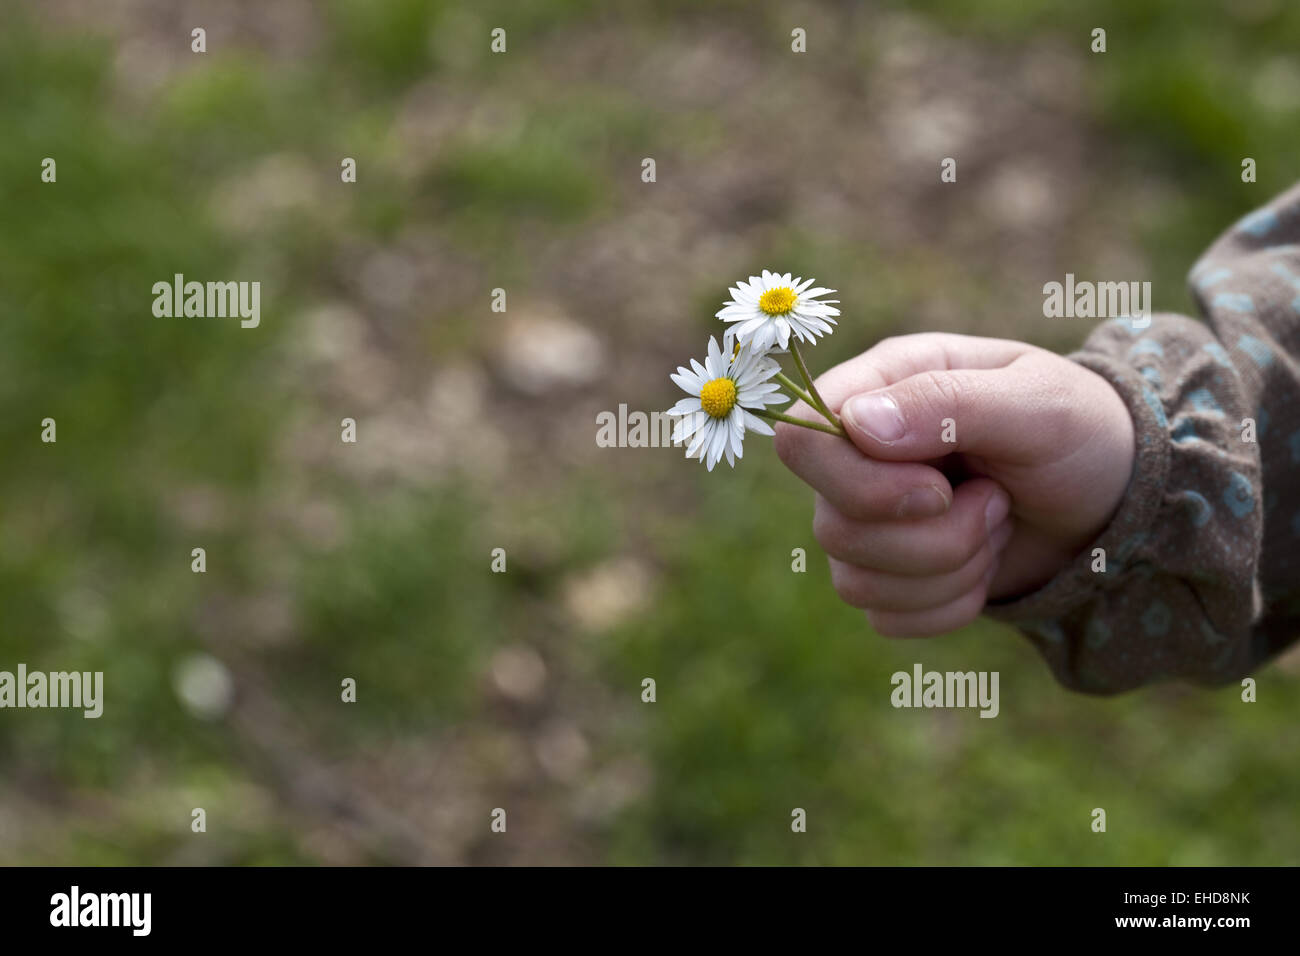 Child with daisy flower Stock Photo